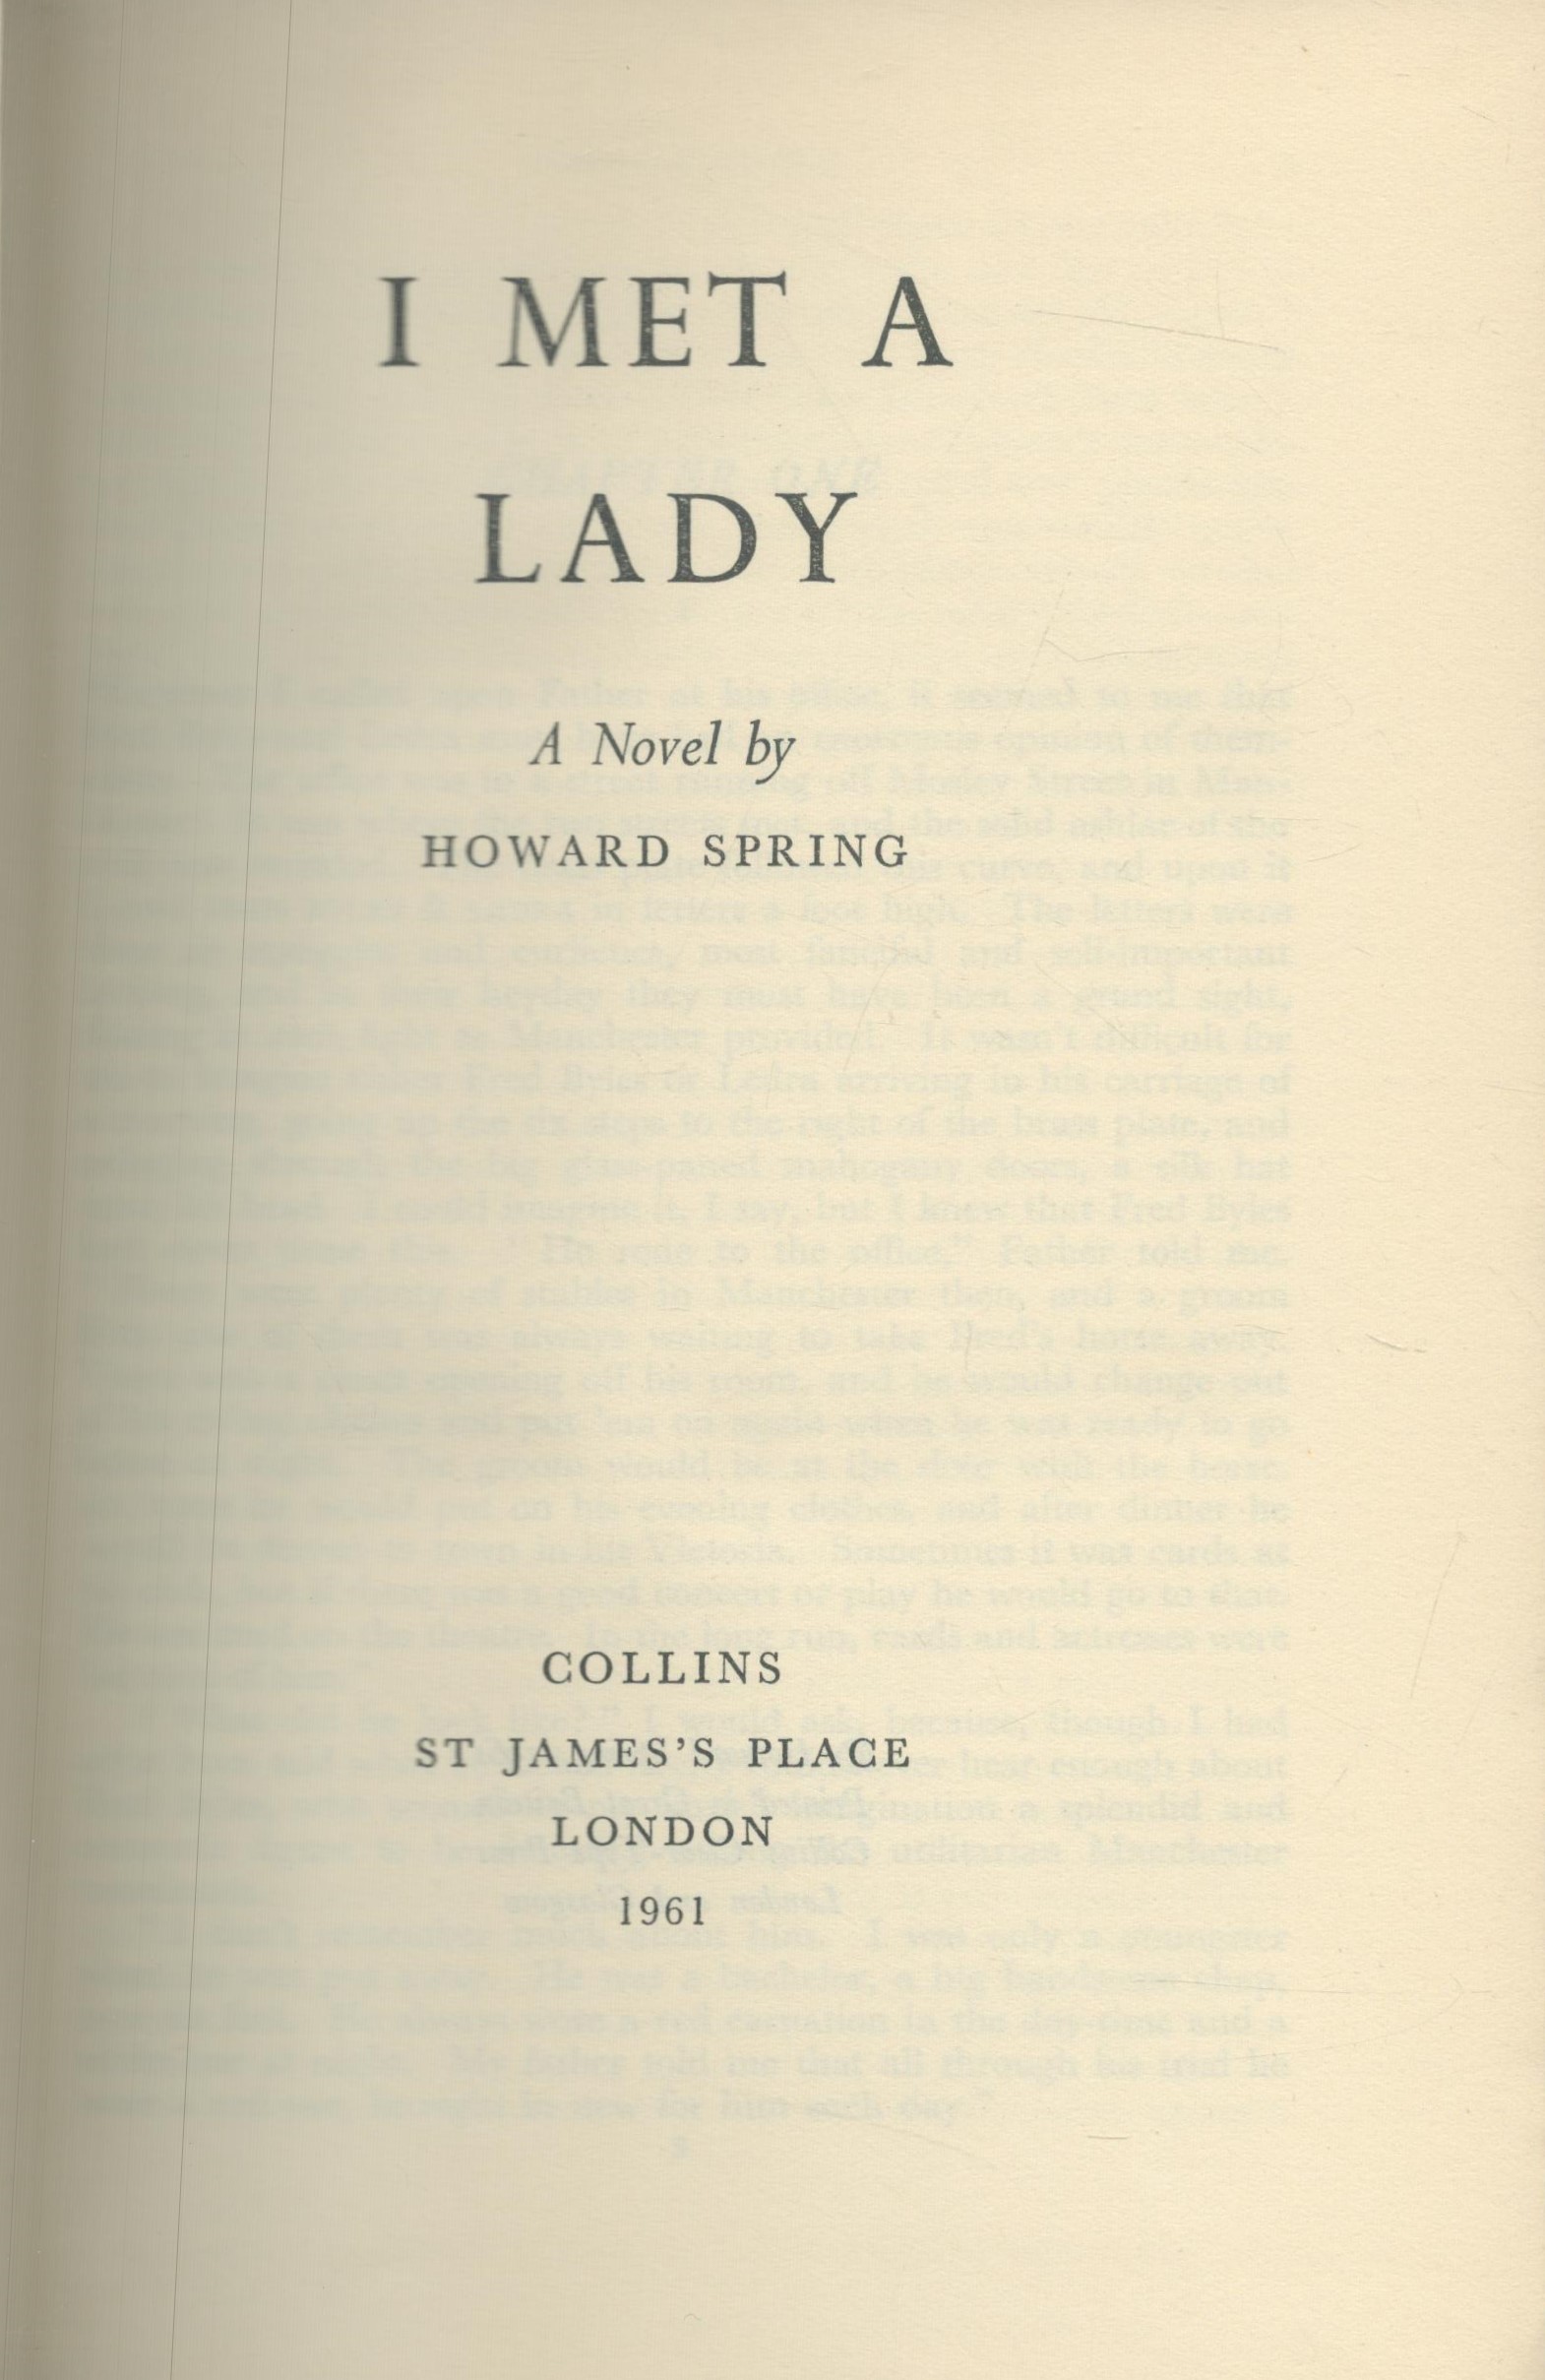 I Met a Lady by Howard Spring 1961 hardback book with 448 pages, signs of ageing dust cover has - Image 2 of 3